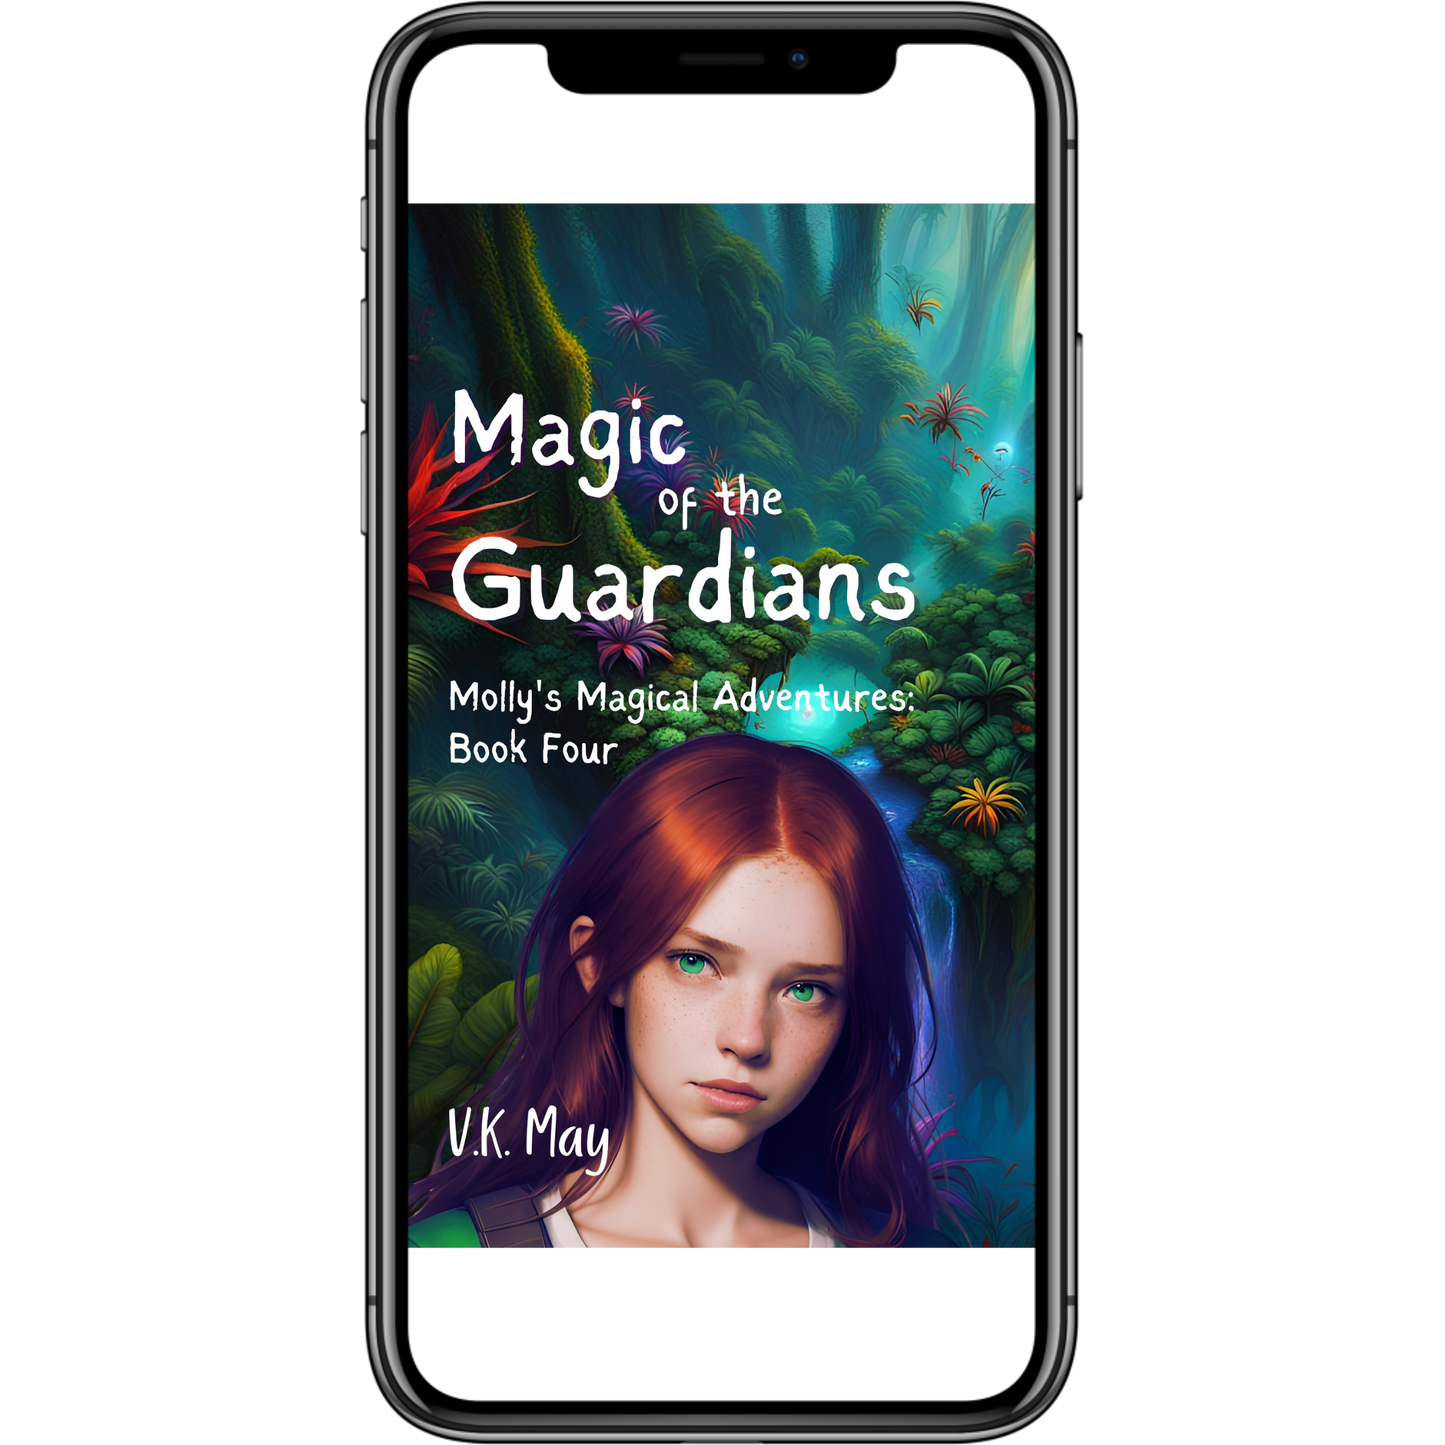 Magic of the Guardians: Molly's Magical Adventures (book 4)